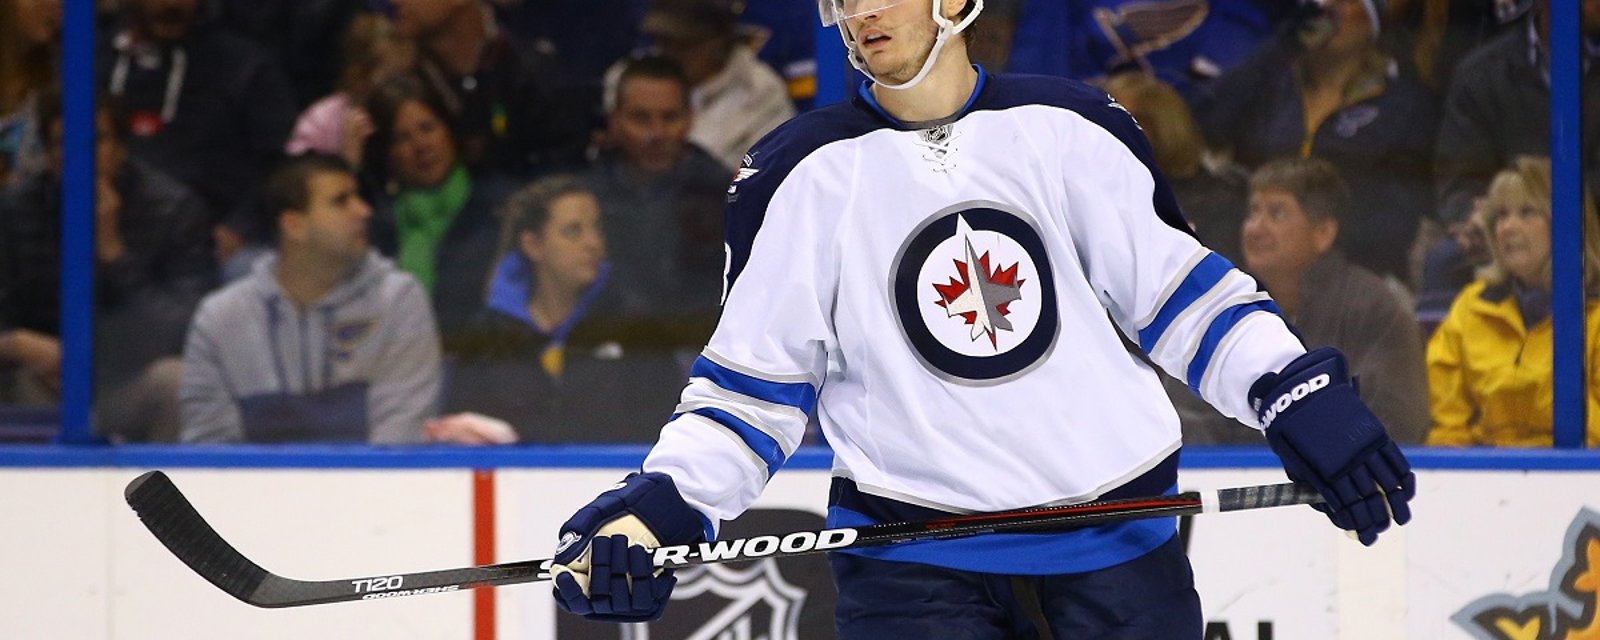 Breaking: The Jacob Trouba saga is about to come to an end.